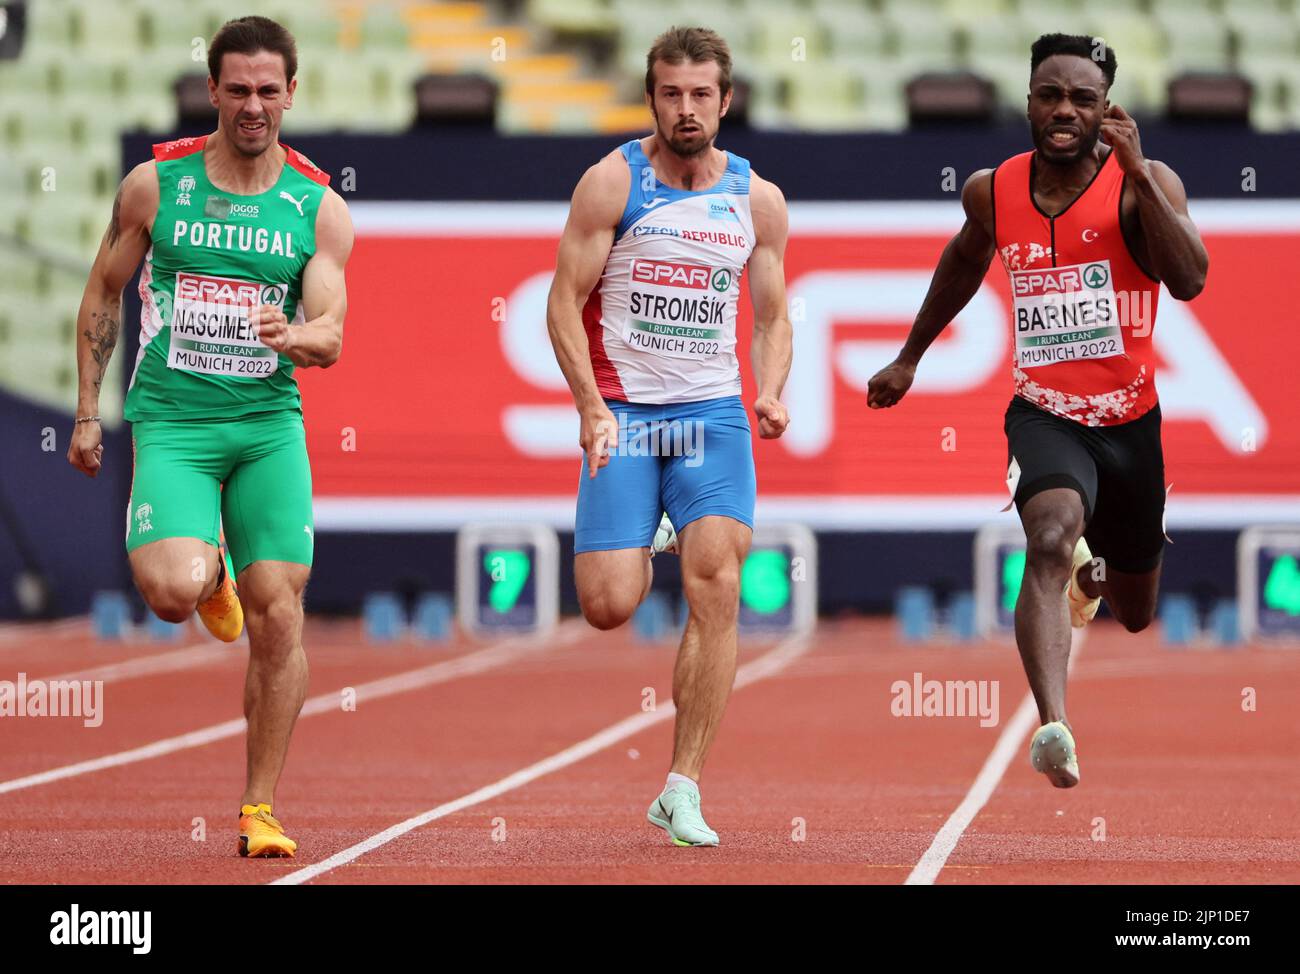 Athletics - 2022 European Championships - Olympiastadion, Munich, Germany - August 15, 2022 Portugal's Carlos Nascimento, Czech Republic's Zdenek Stromsik and Turkey's Emre Zafer Barnes in action during the Men's Decathlon 100m - Heats REUTERS/Wolfgang Rattay Stock Photo